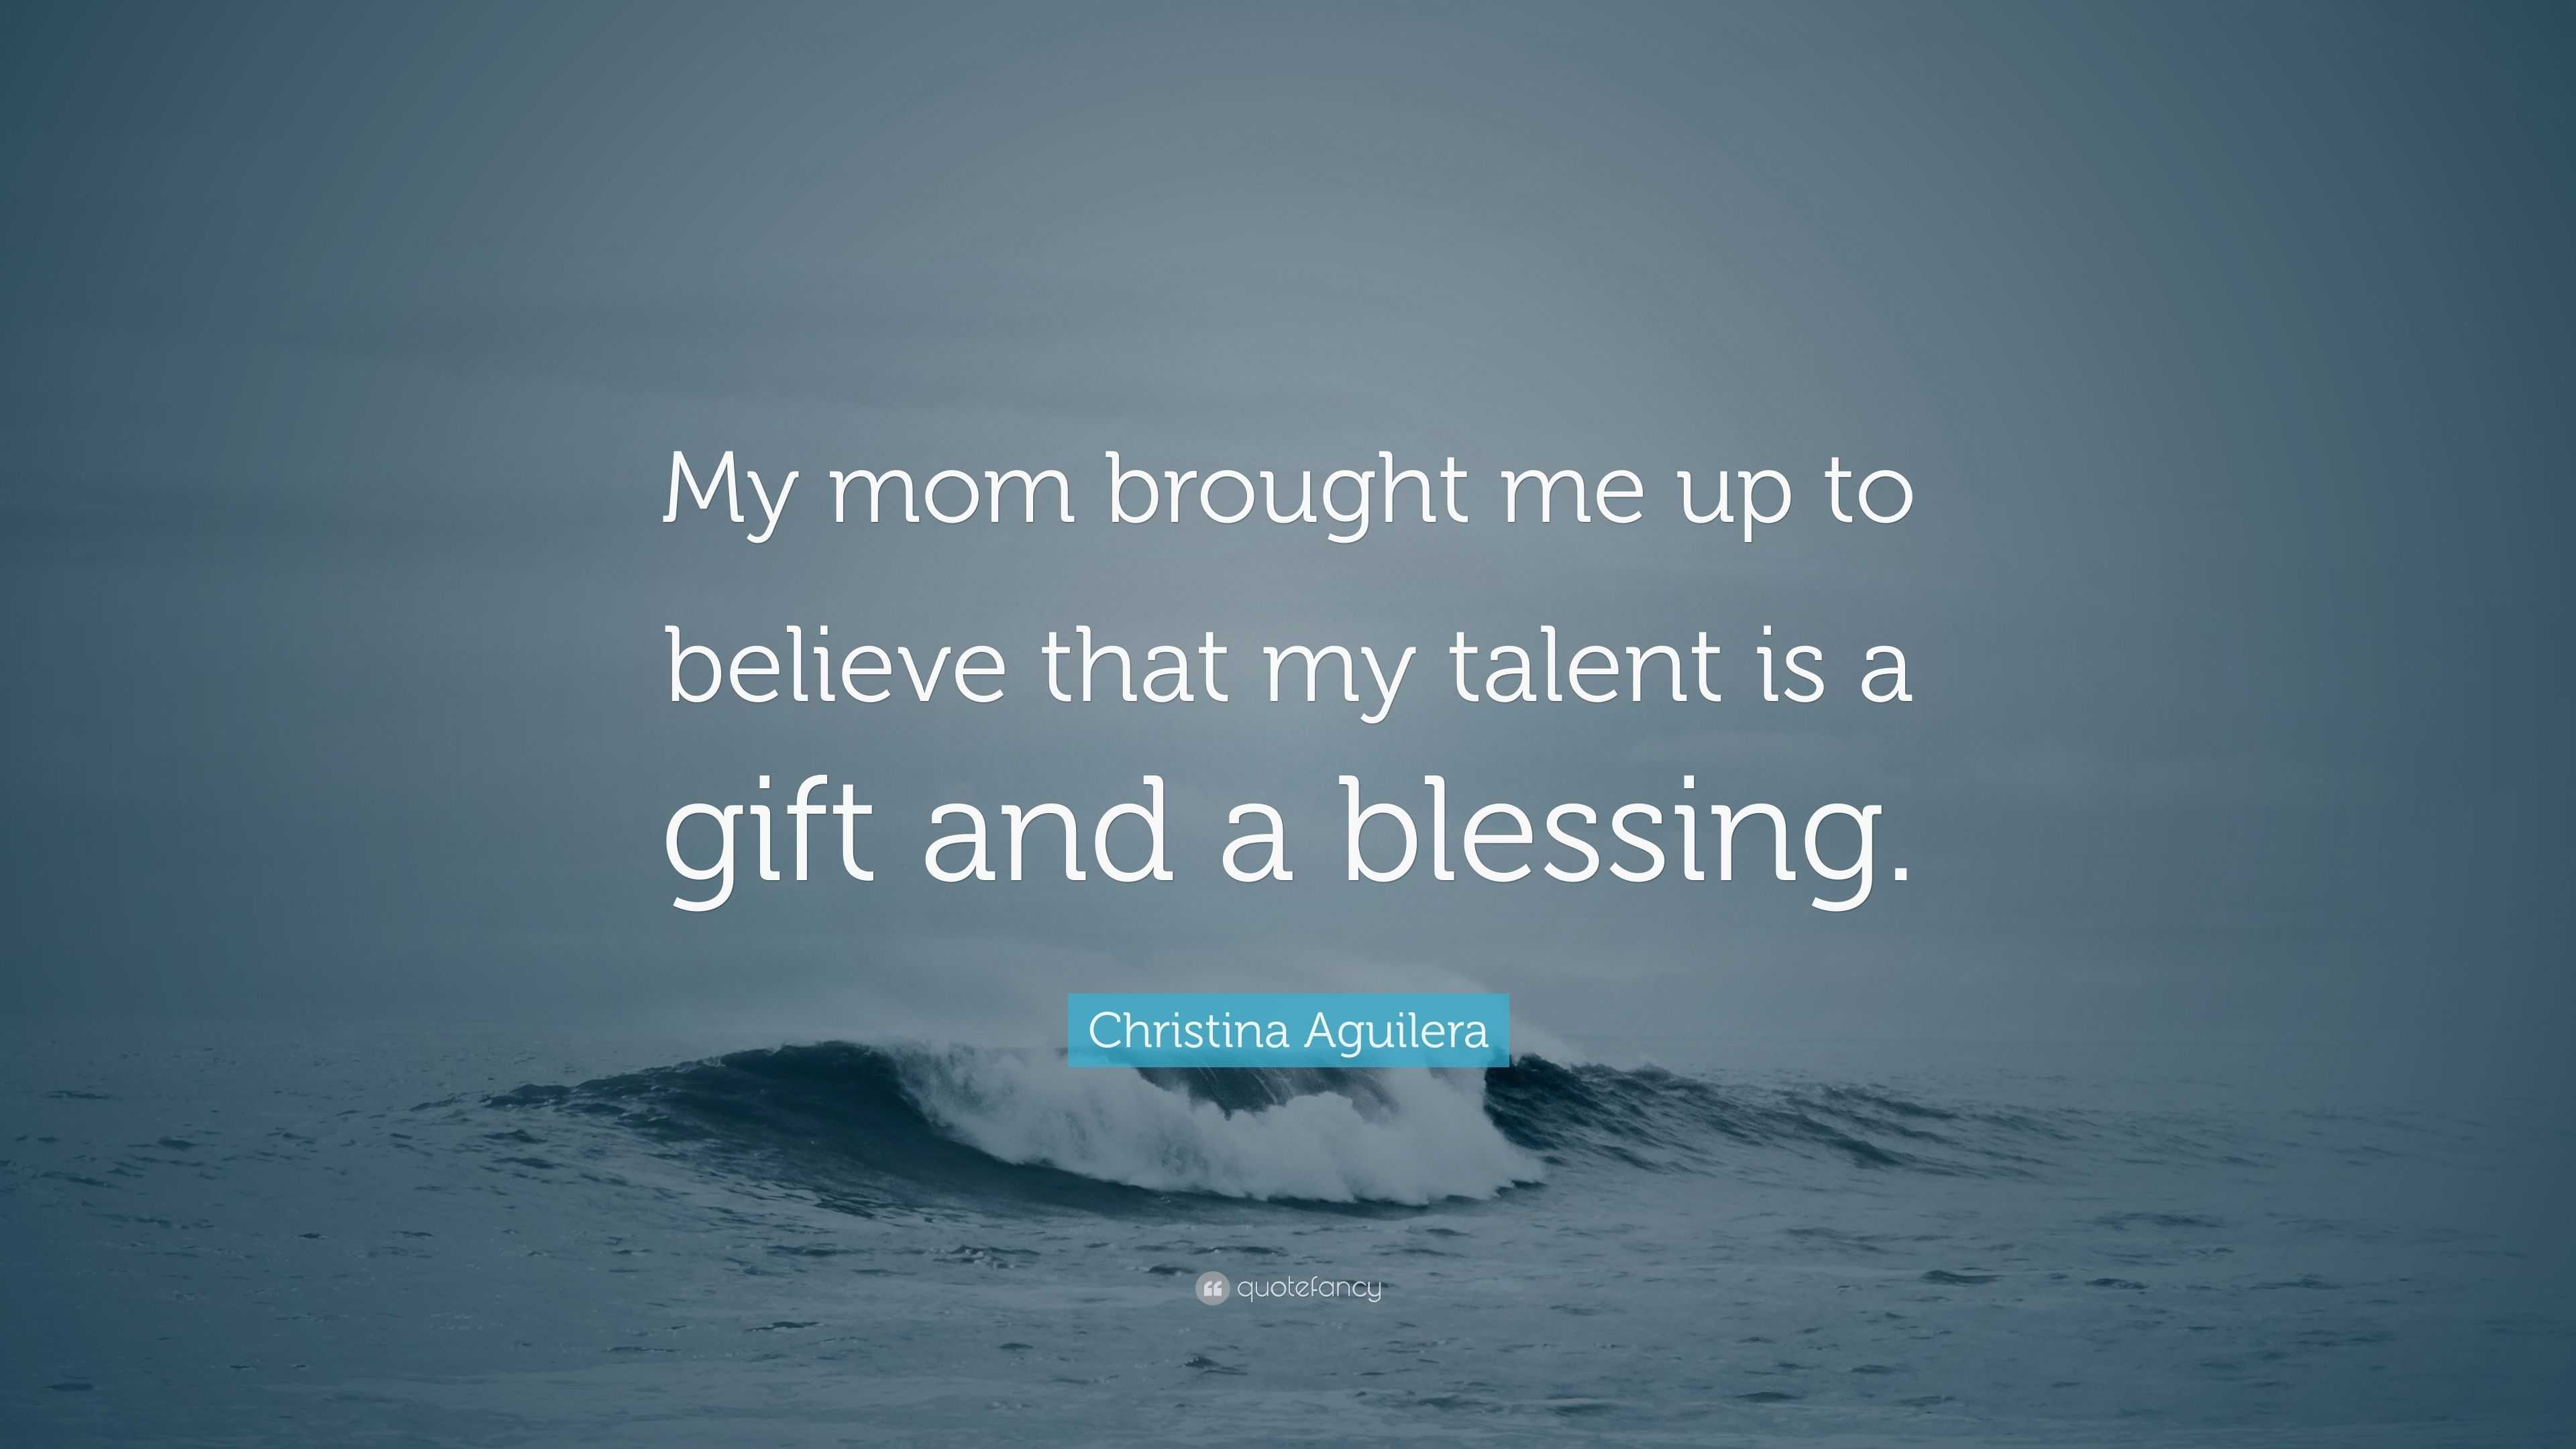 Christina Aguilera Quote: “My mom brought me up to believe that my talent  is a gift